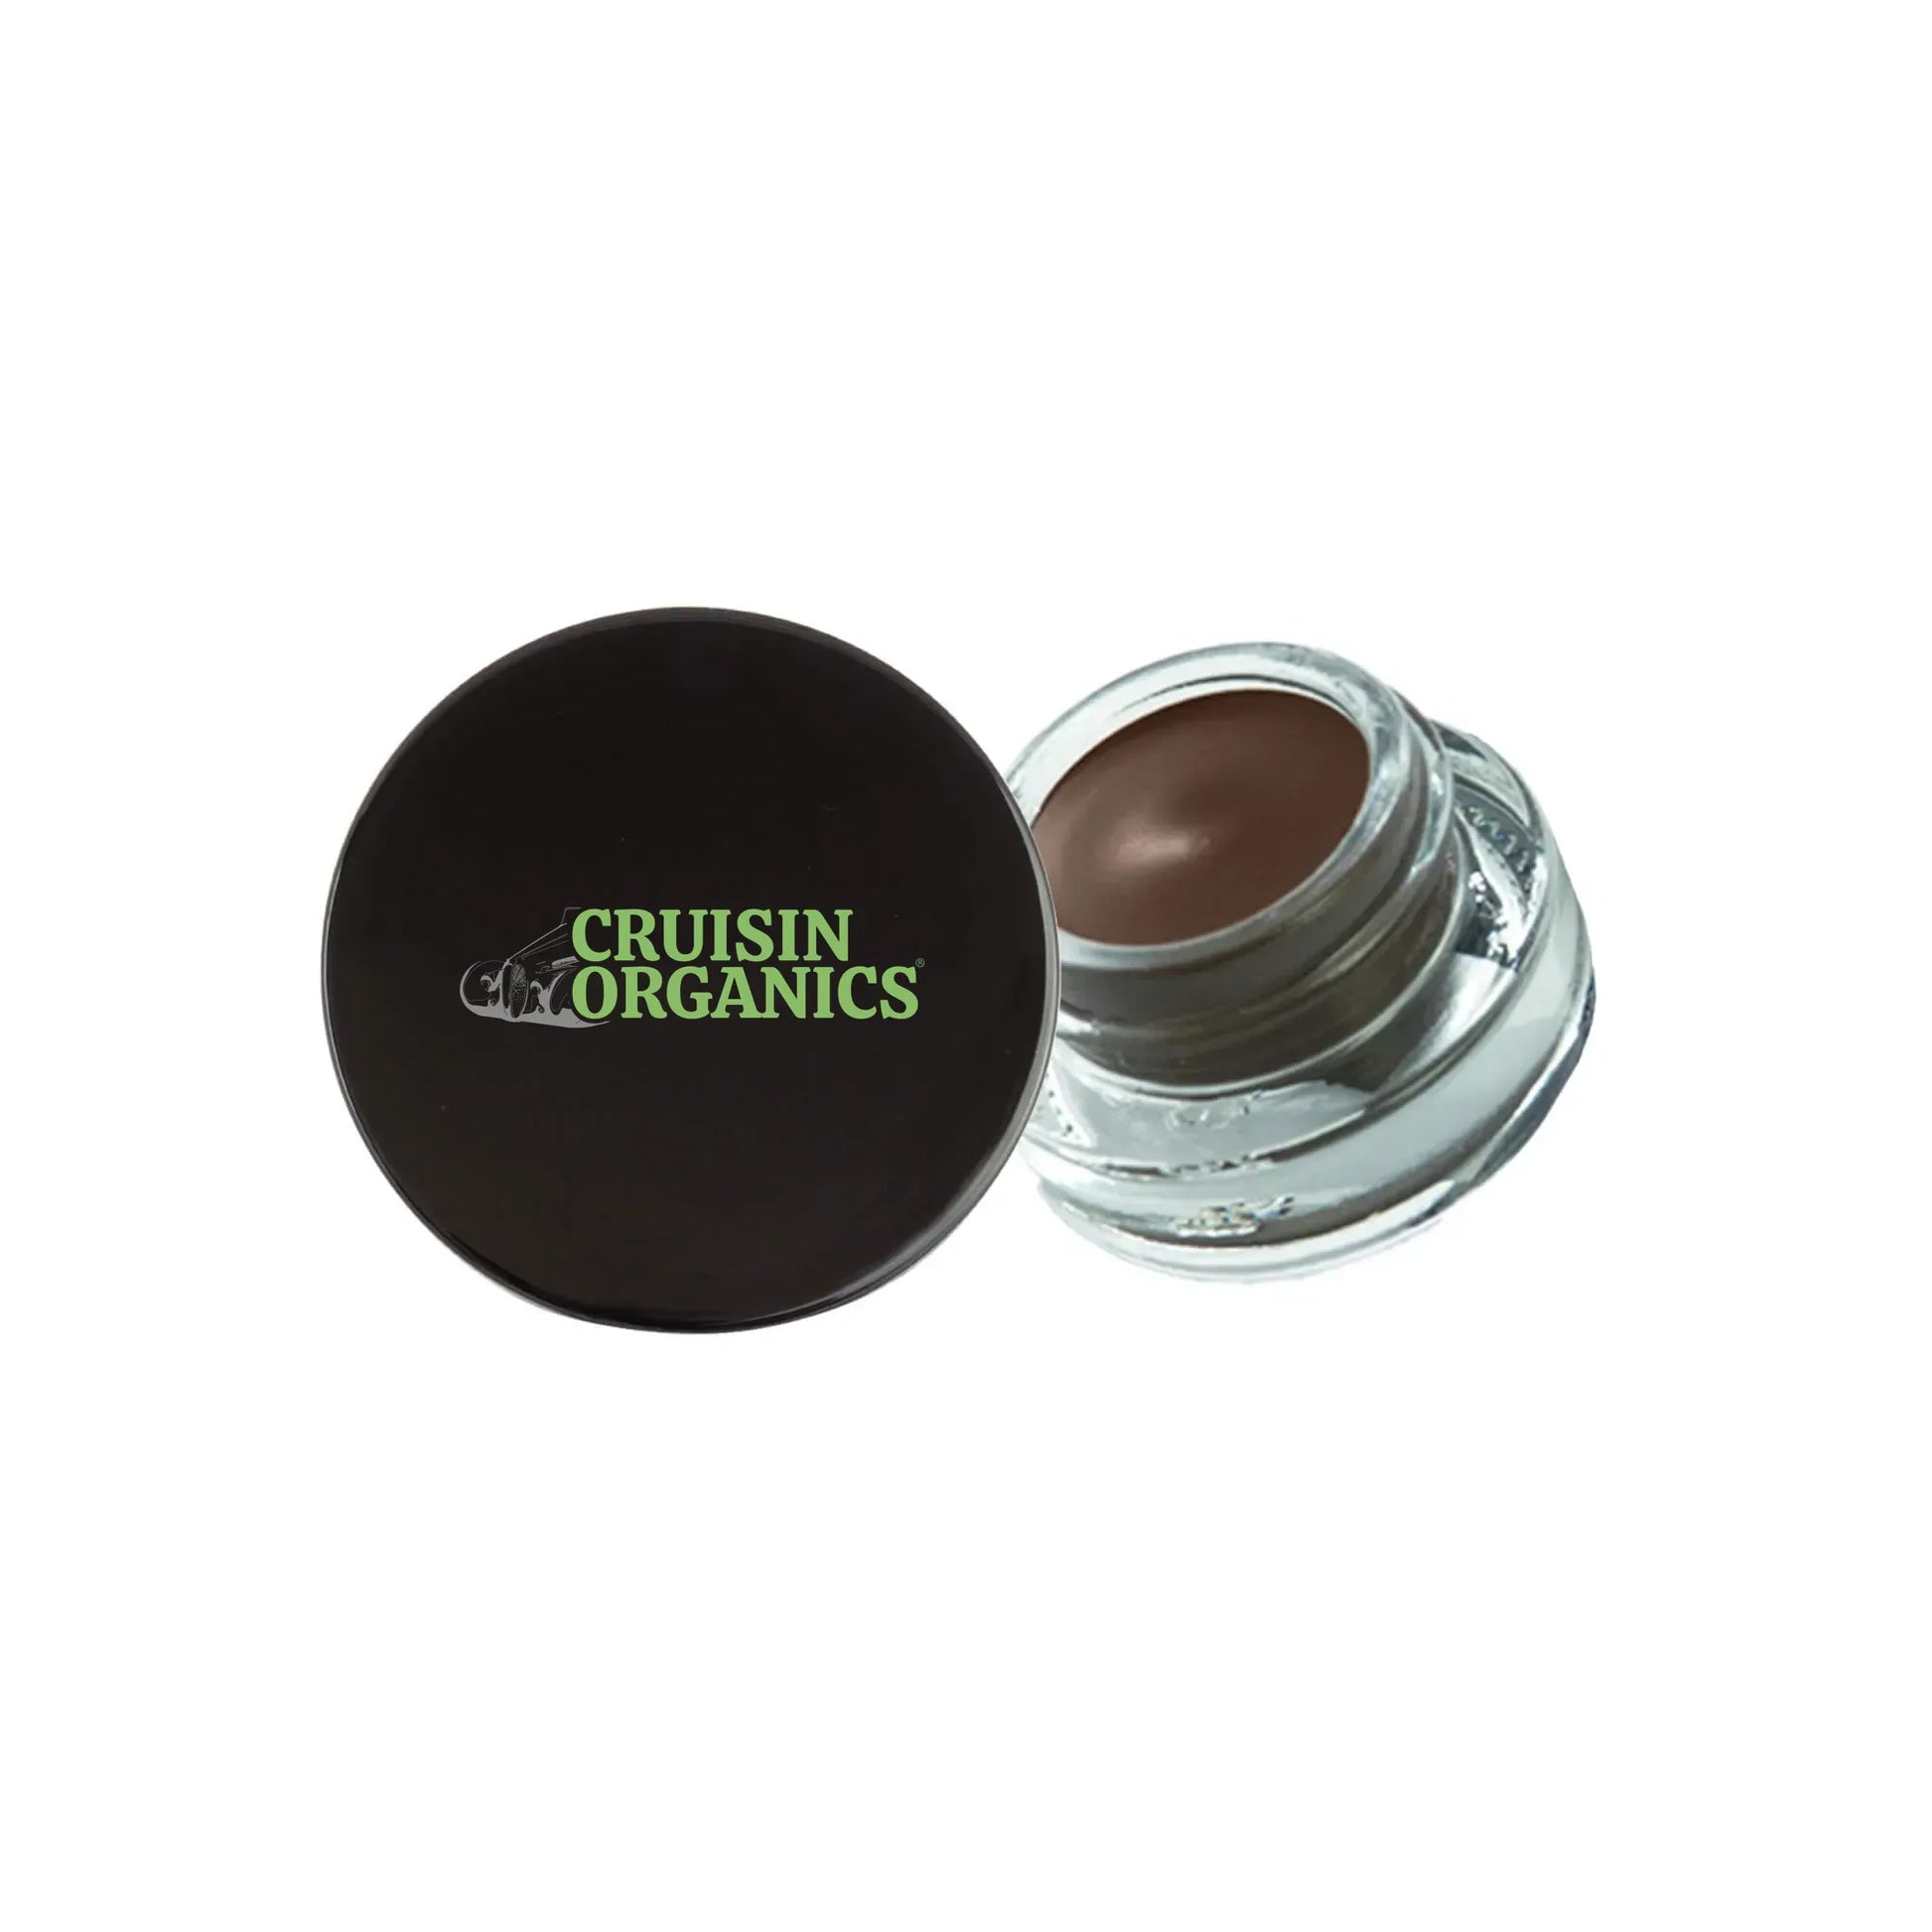 Achieve defined, flawless brows with Cruisin Organics Tiramisu Brow Pomade. For a controlled and polished look, use on oily skin to sculpt, shape, and fill.